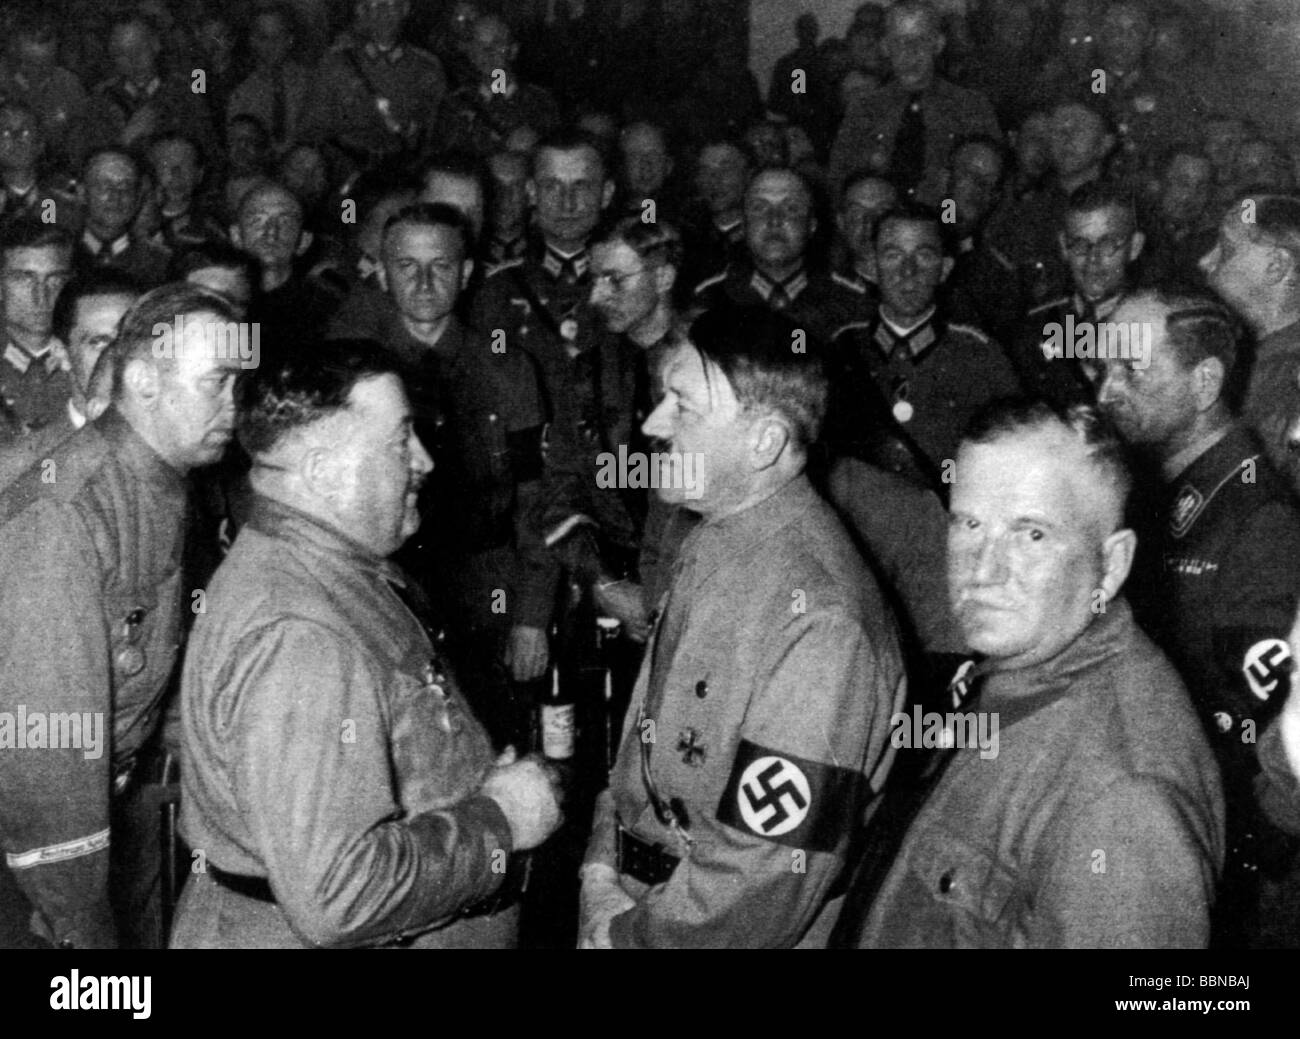 Hitler, Adolf, 20.4.1889 - 30.4.1945, German politician (NSDAP), Fuehrer and Reich Chancellor since 1933, half length, meeting of the 'Old Comrades' at the Loewenbraeukeller, Munich, late 1930s, Stock Photo